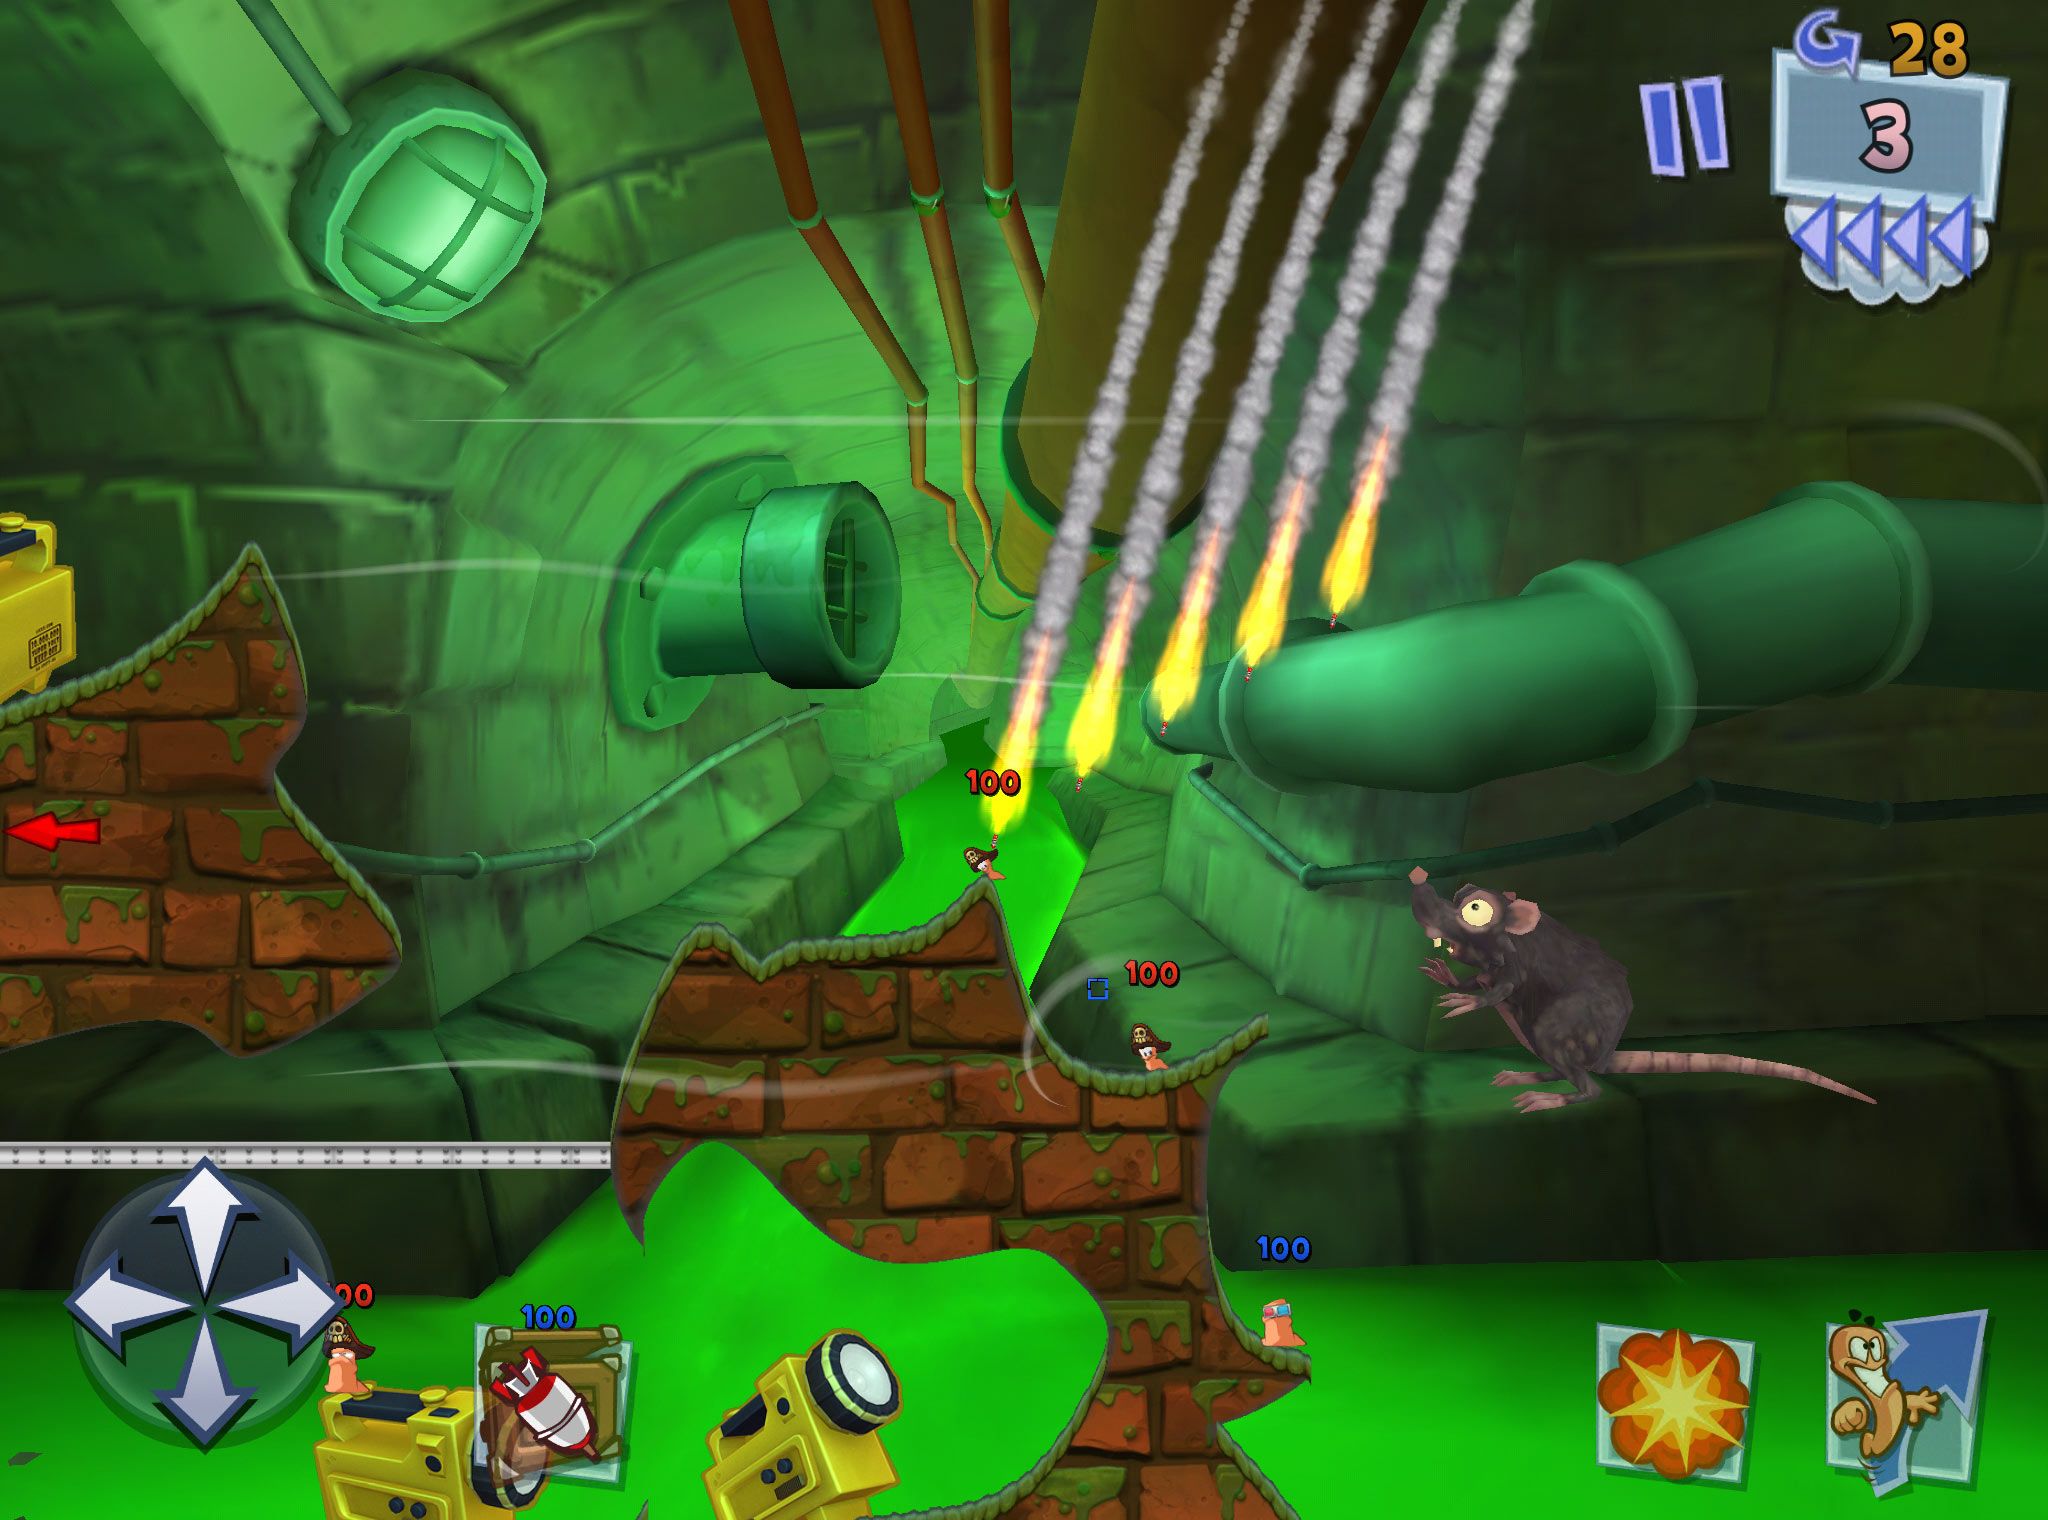 Worms 3, more reviewed on mobile